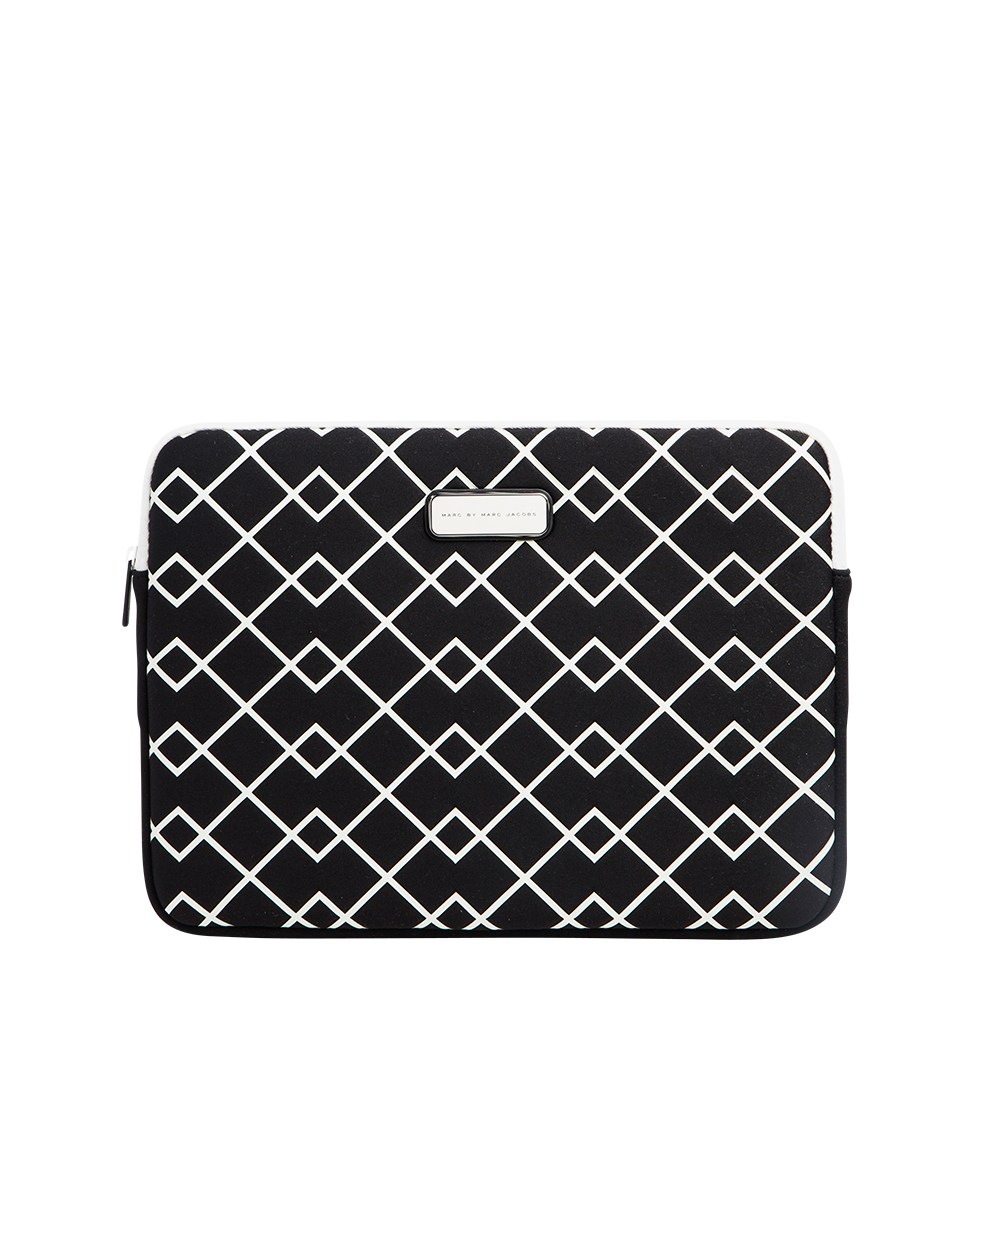 Marc by Marc Jacobs laptop case, $119, from Workshop